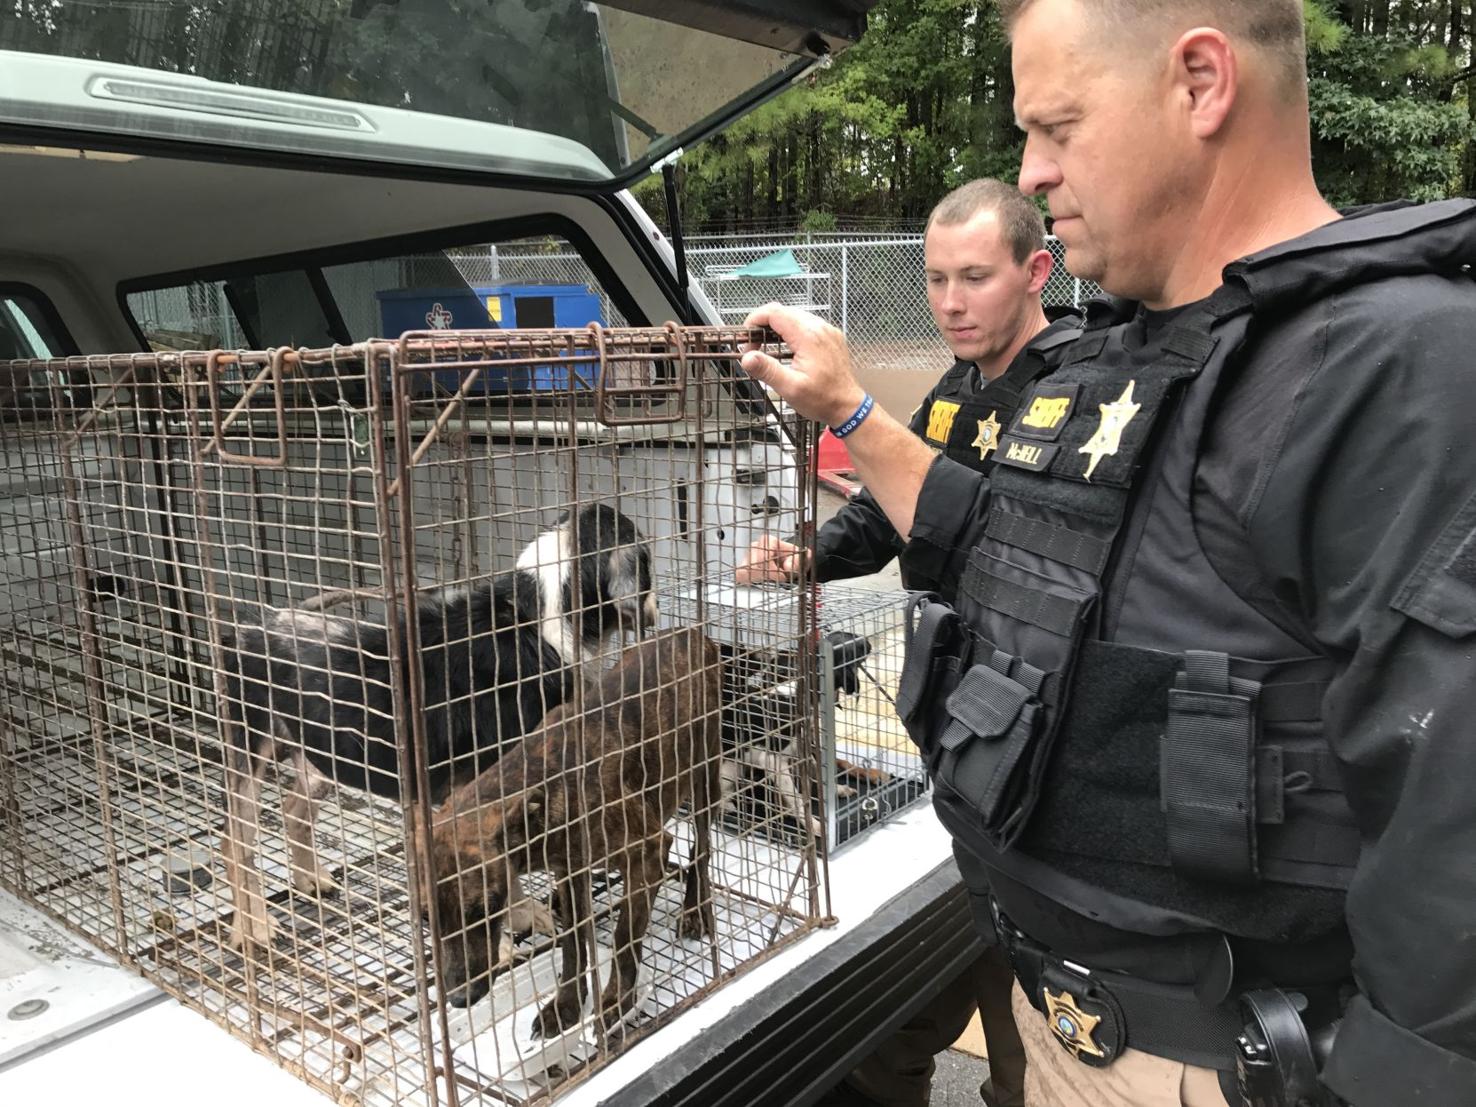 Mother, Daughter Arrested After Sheriff's Deputies Seize 17 Dogs in